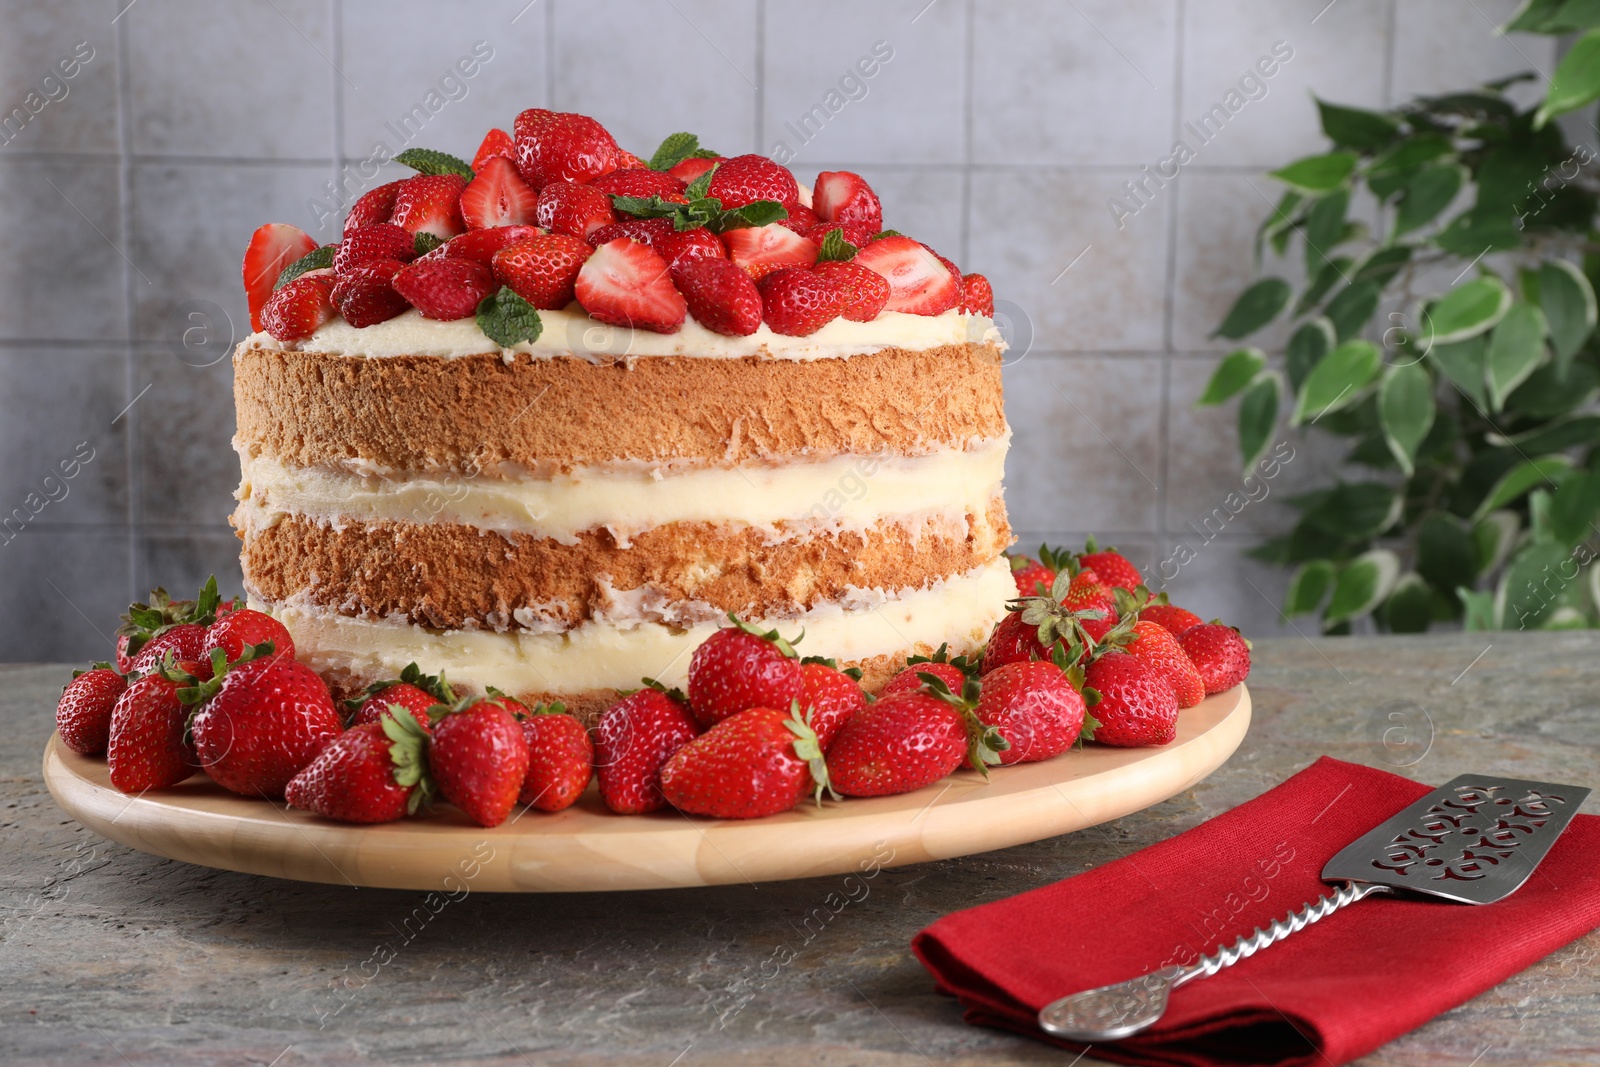 Photo of Tasty cake with fresh strawberries and mint served on gray table